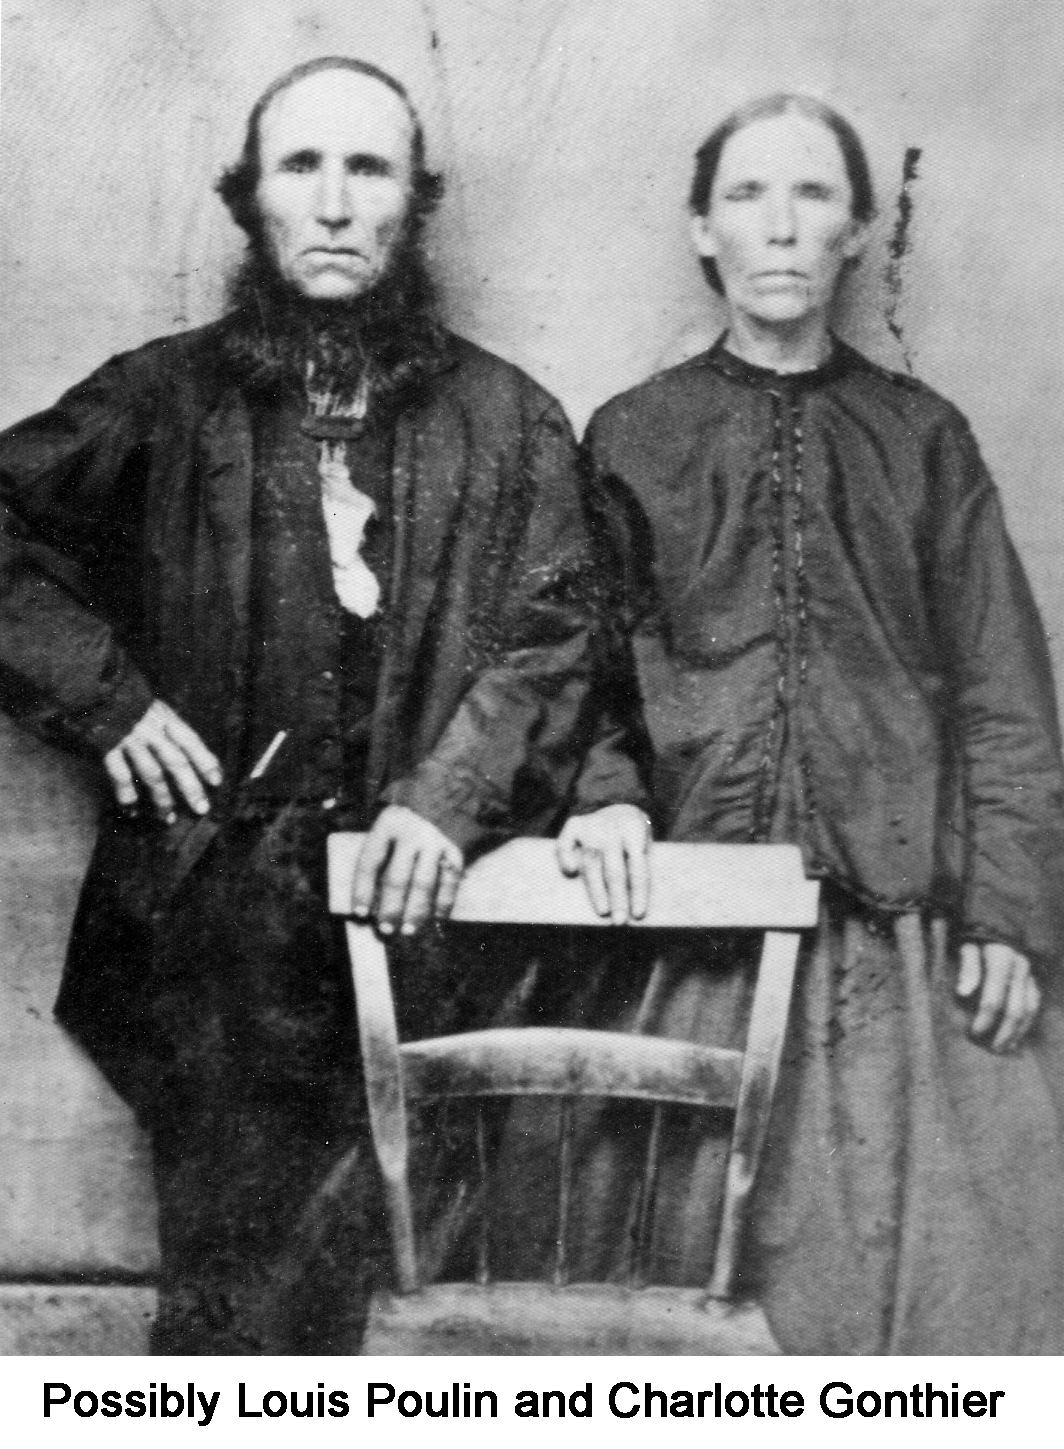 The couple are standing behind a kitchen chair and staring at the camera. 
         Both wear dark clothing. He has a beard, but no mustache. 
         Her hair is tied back.